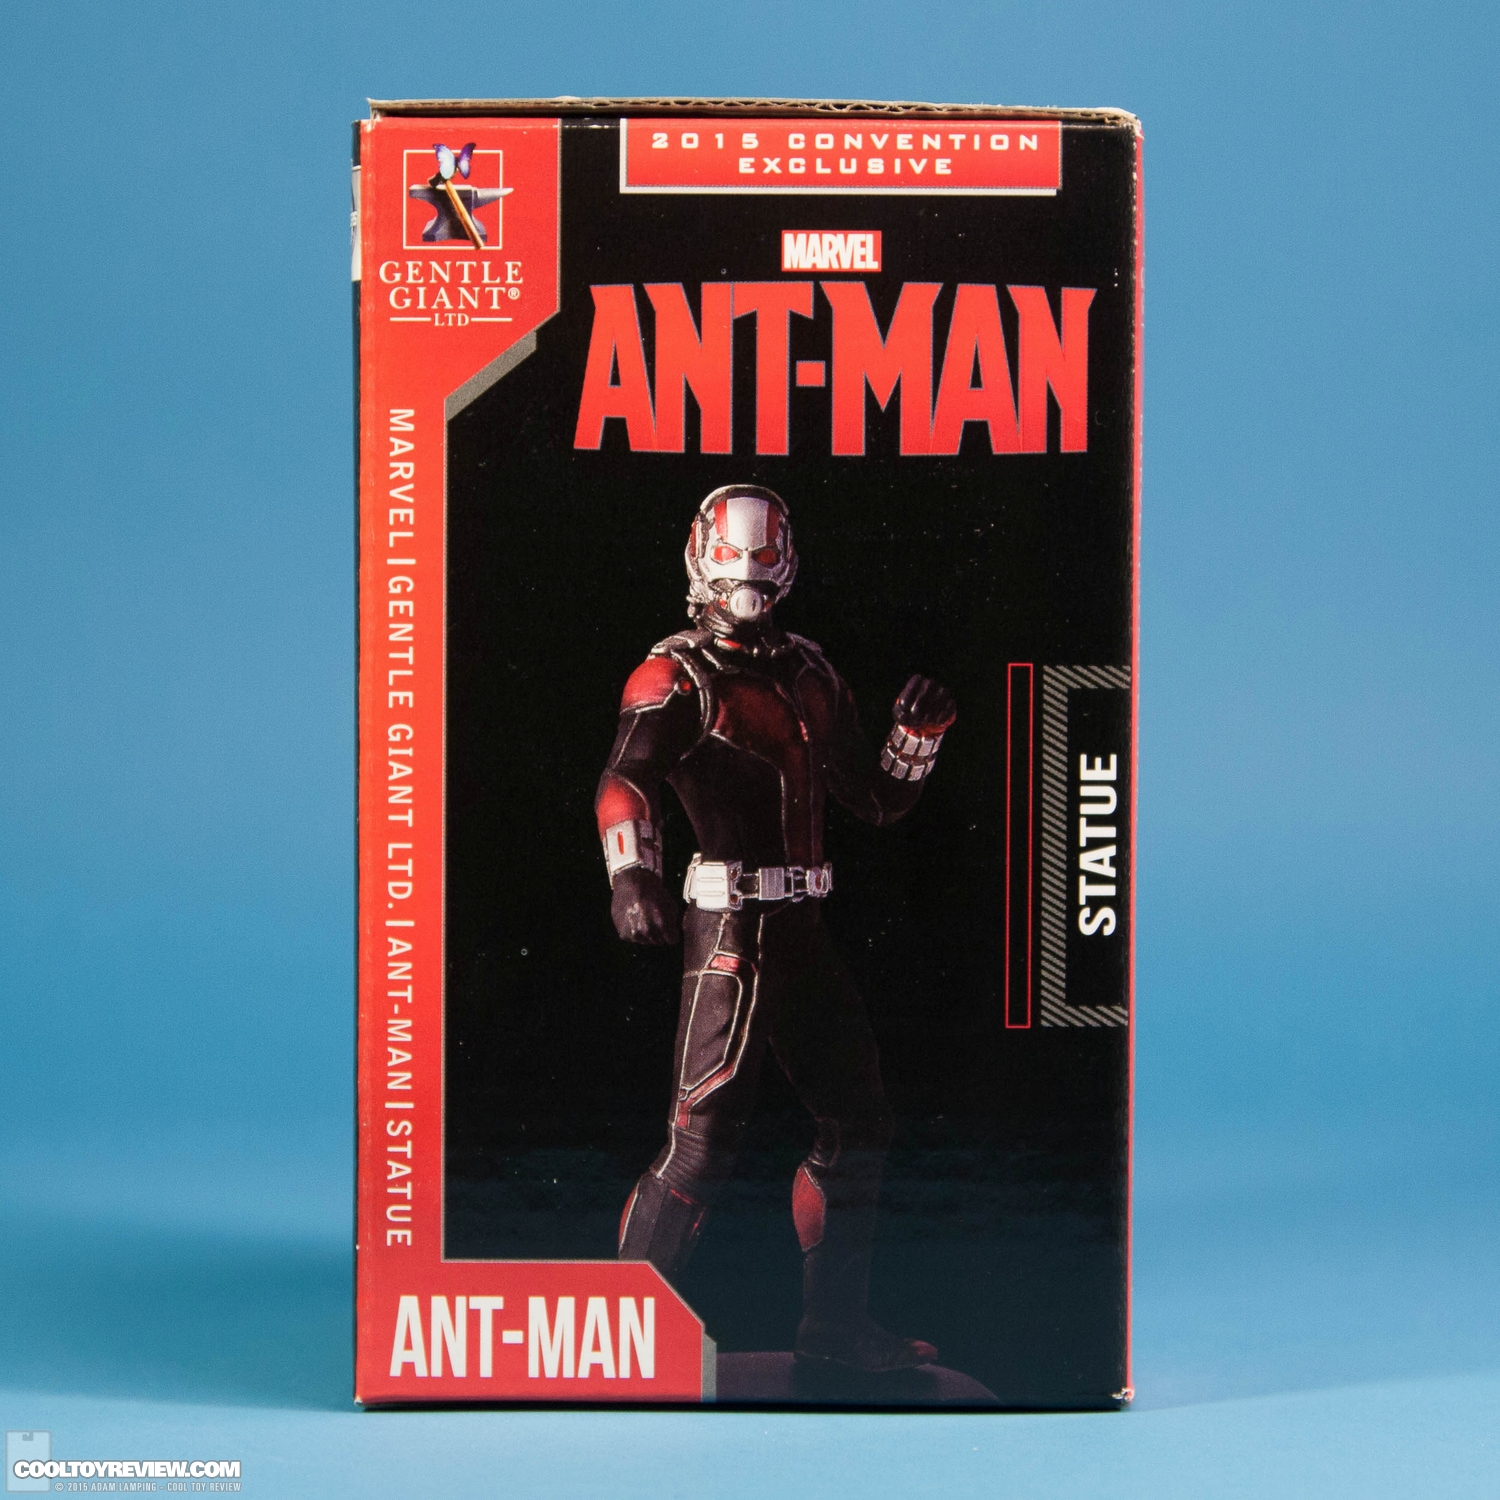 gentle-giant-ant-man-statue-2015-convention-exclusive-019.jpg